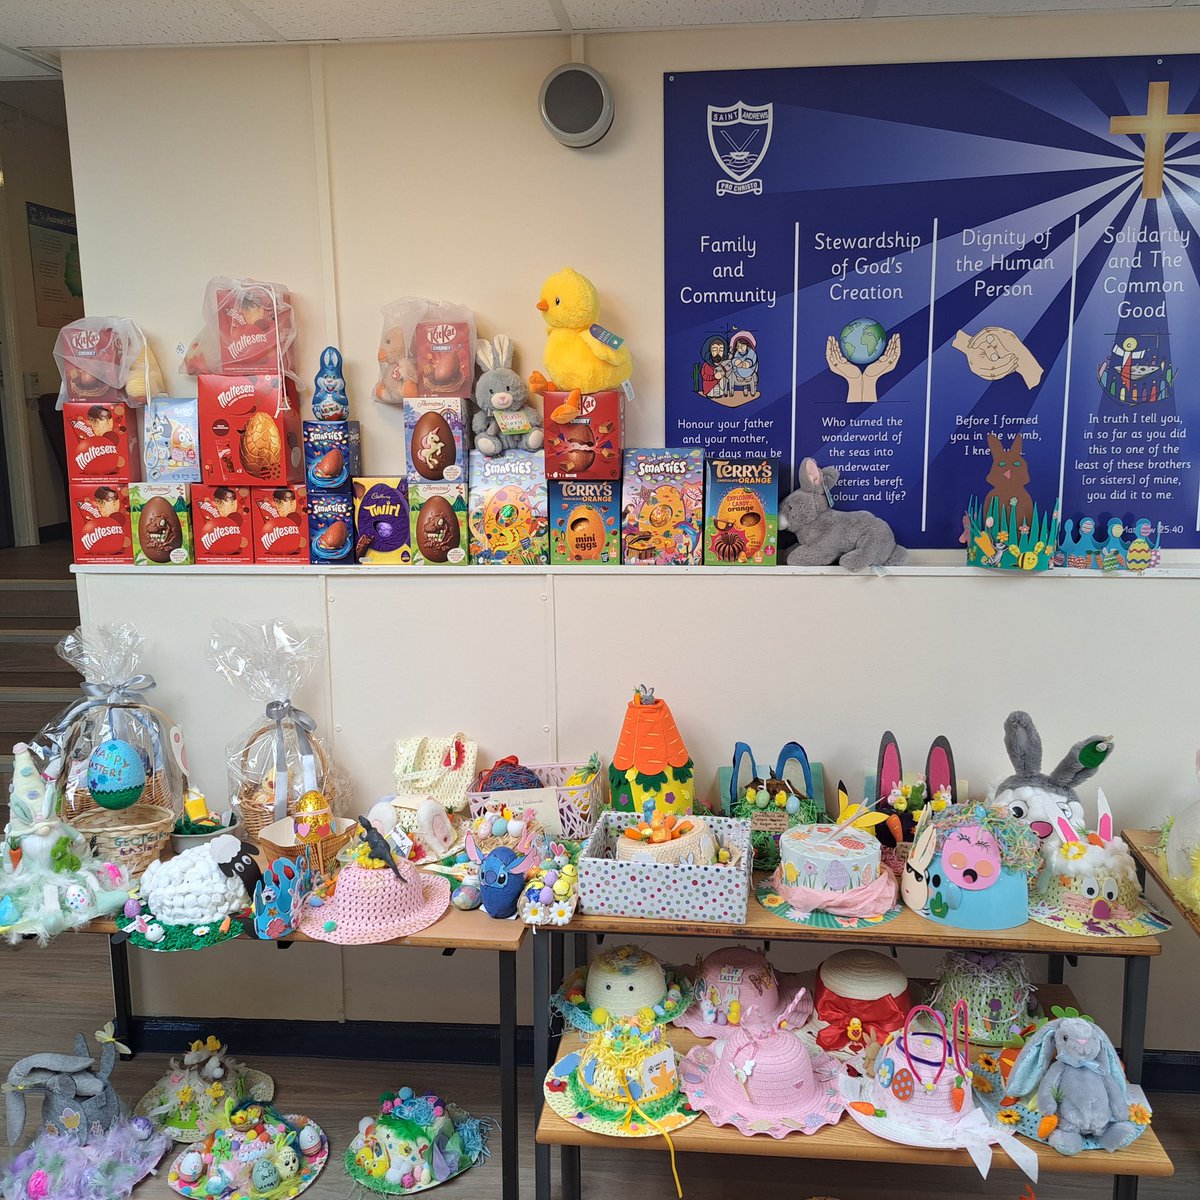 Well this is going to be almost impossible...choosing winners for our Easter Bonnet and Egg Decorating competition when the standards are this high! Incredible effort 🙌🐣🥚😍✝️ #PTA #Bonnets #Eggs #youareallwinners